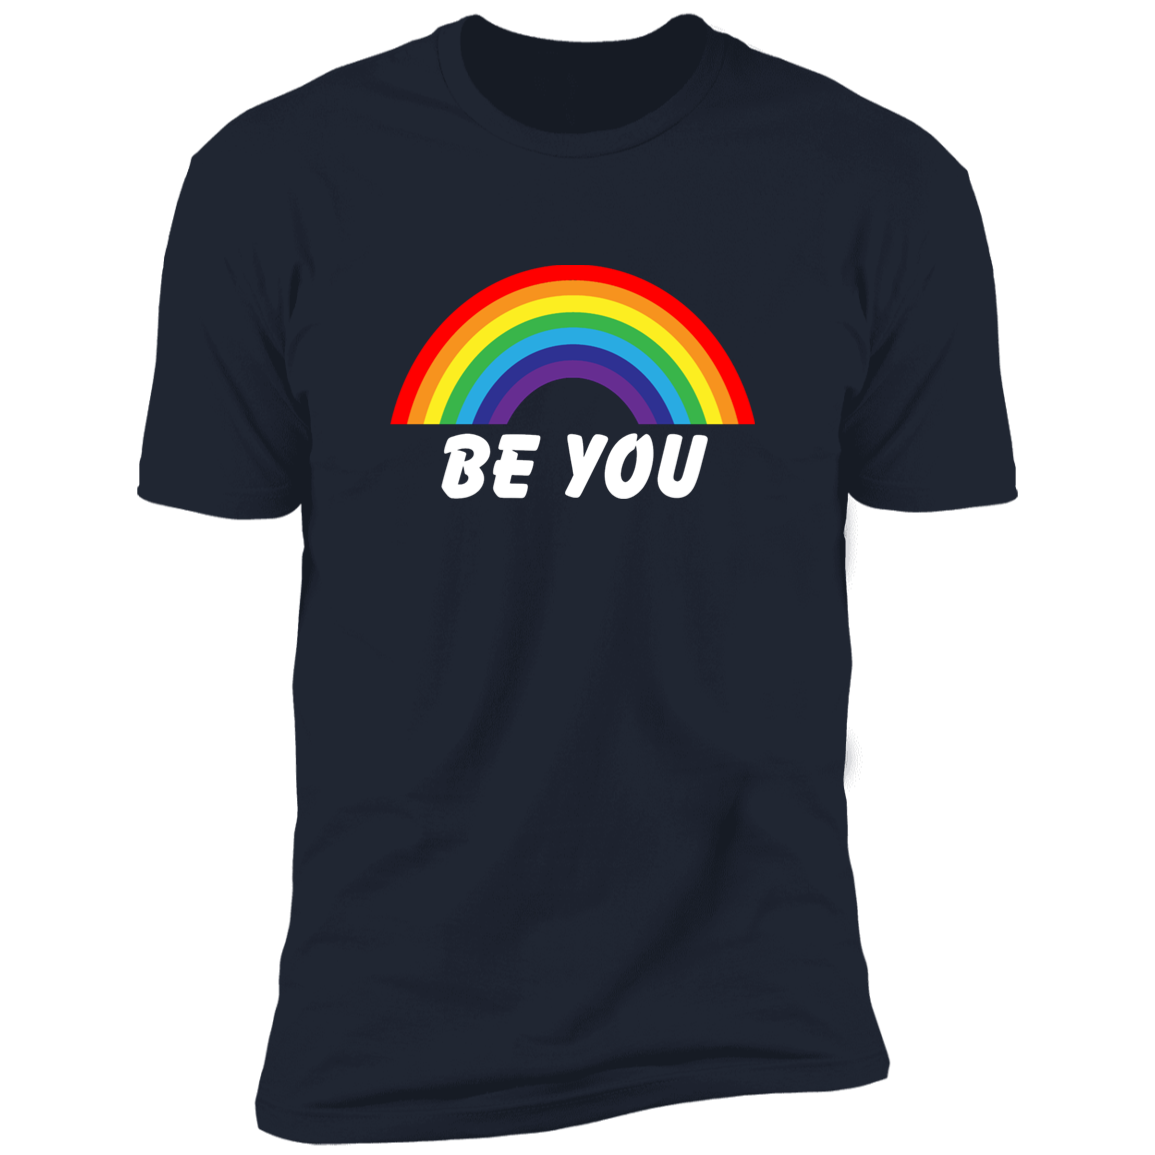 BE YOU Pride Tee!